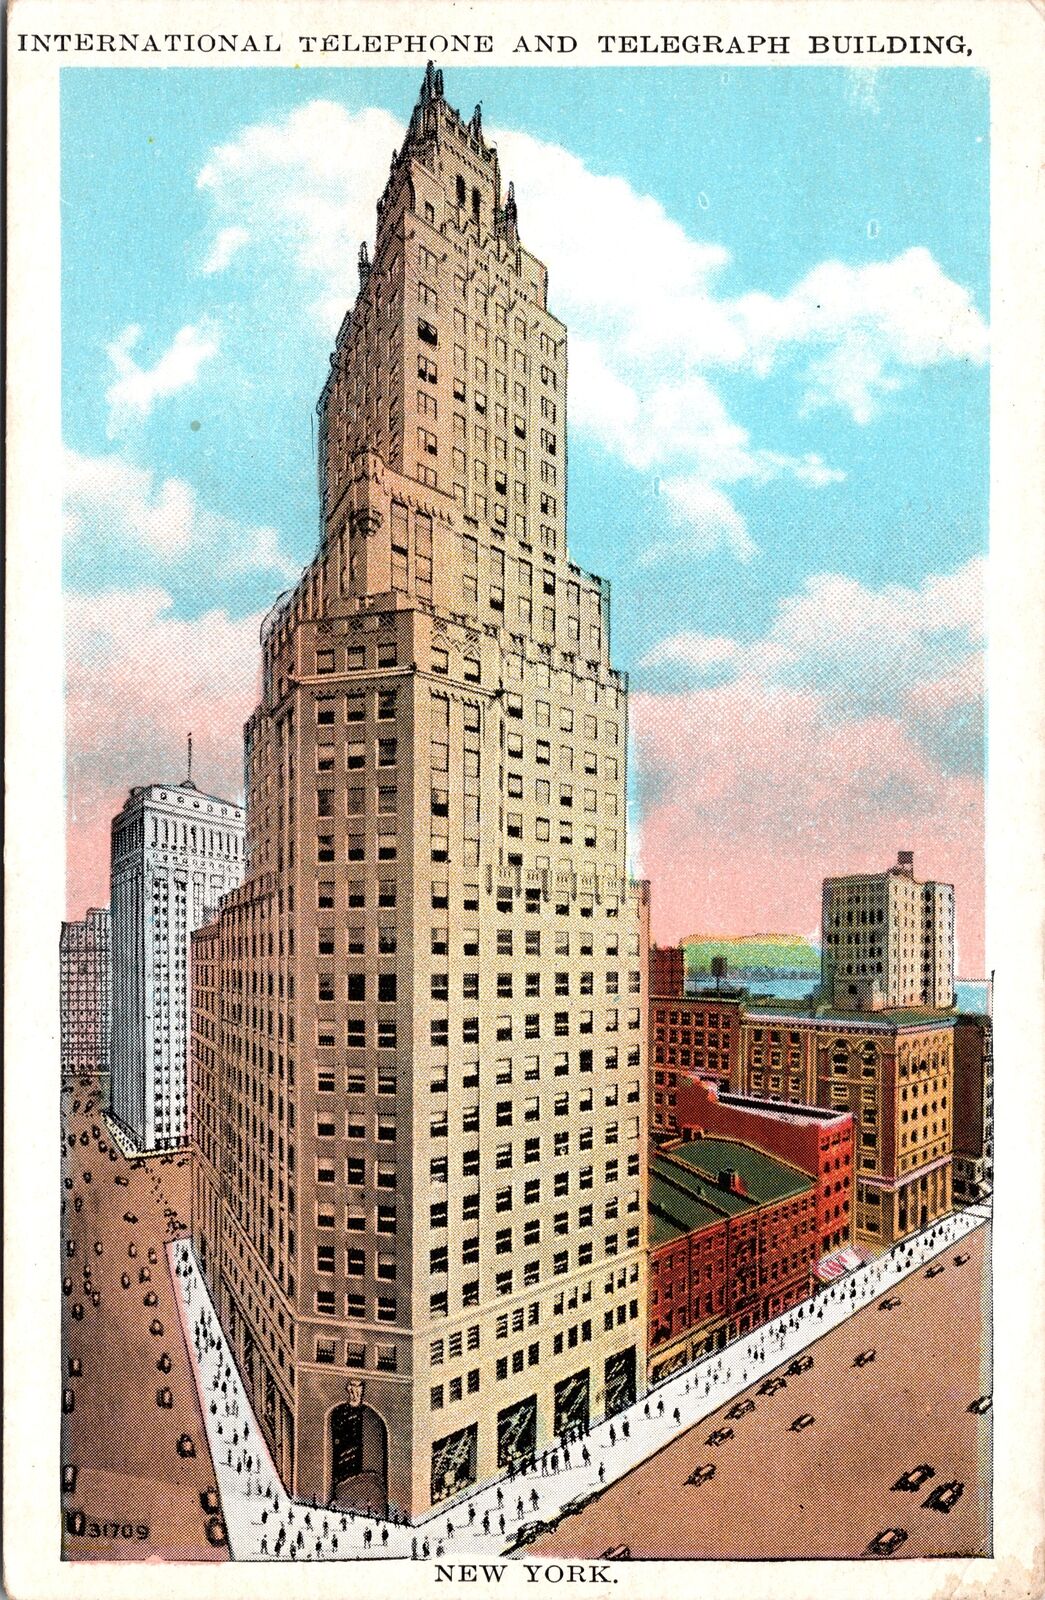 VINTAGE POSTCARD THE INTERNATIONAL TELEPHONE AND TELEGRAPH BUILDING NYC c. 1920